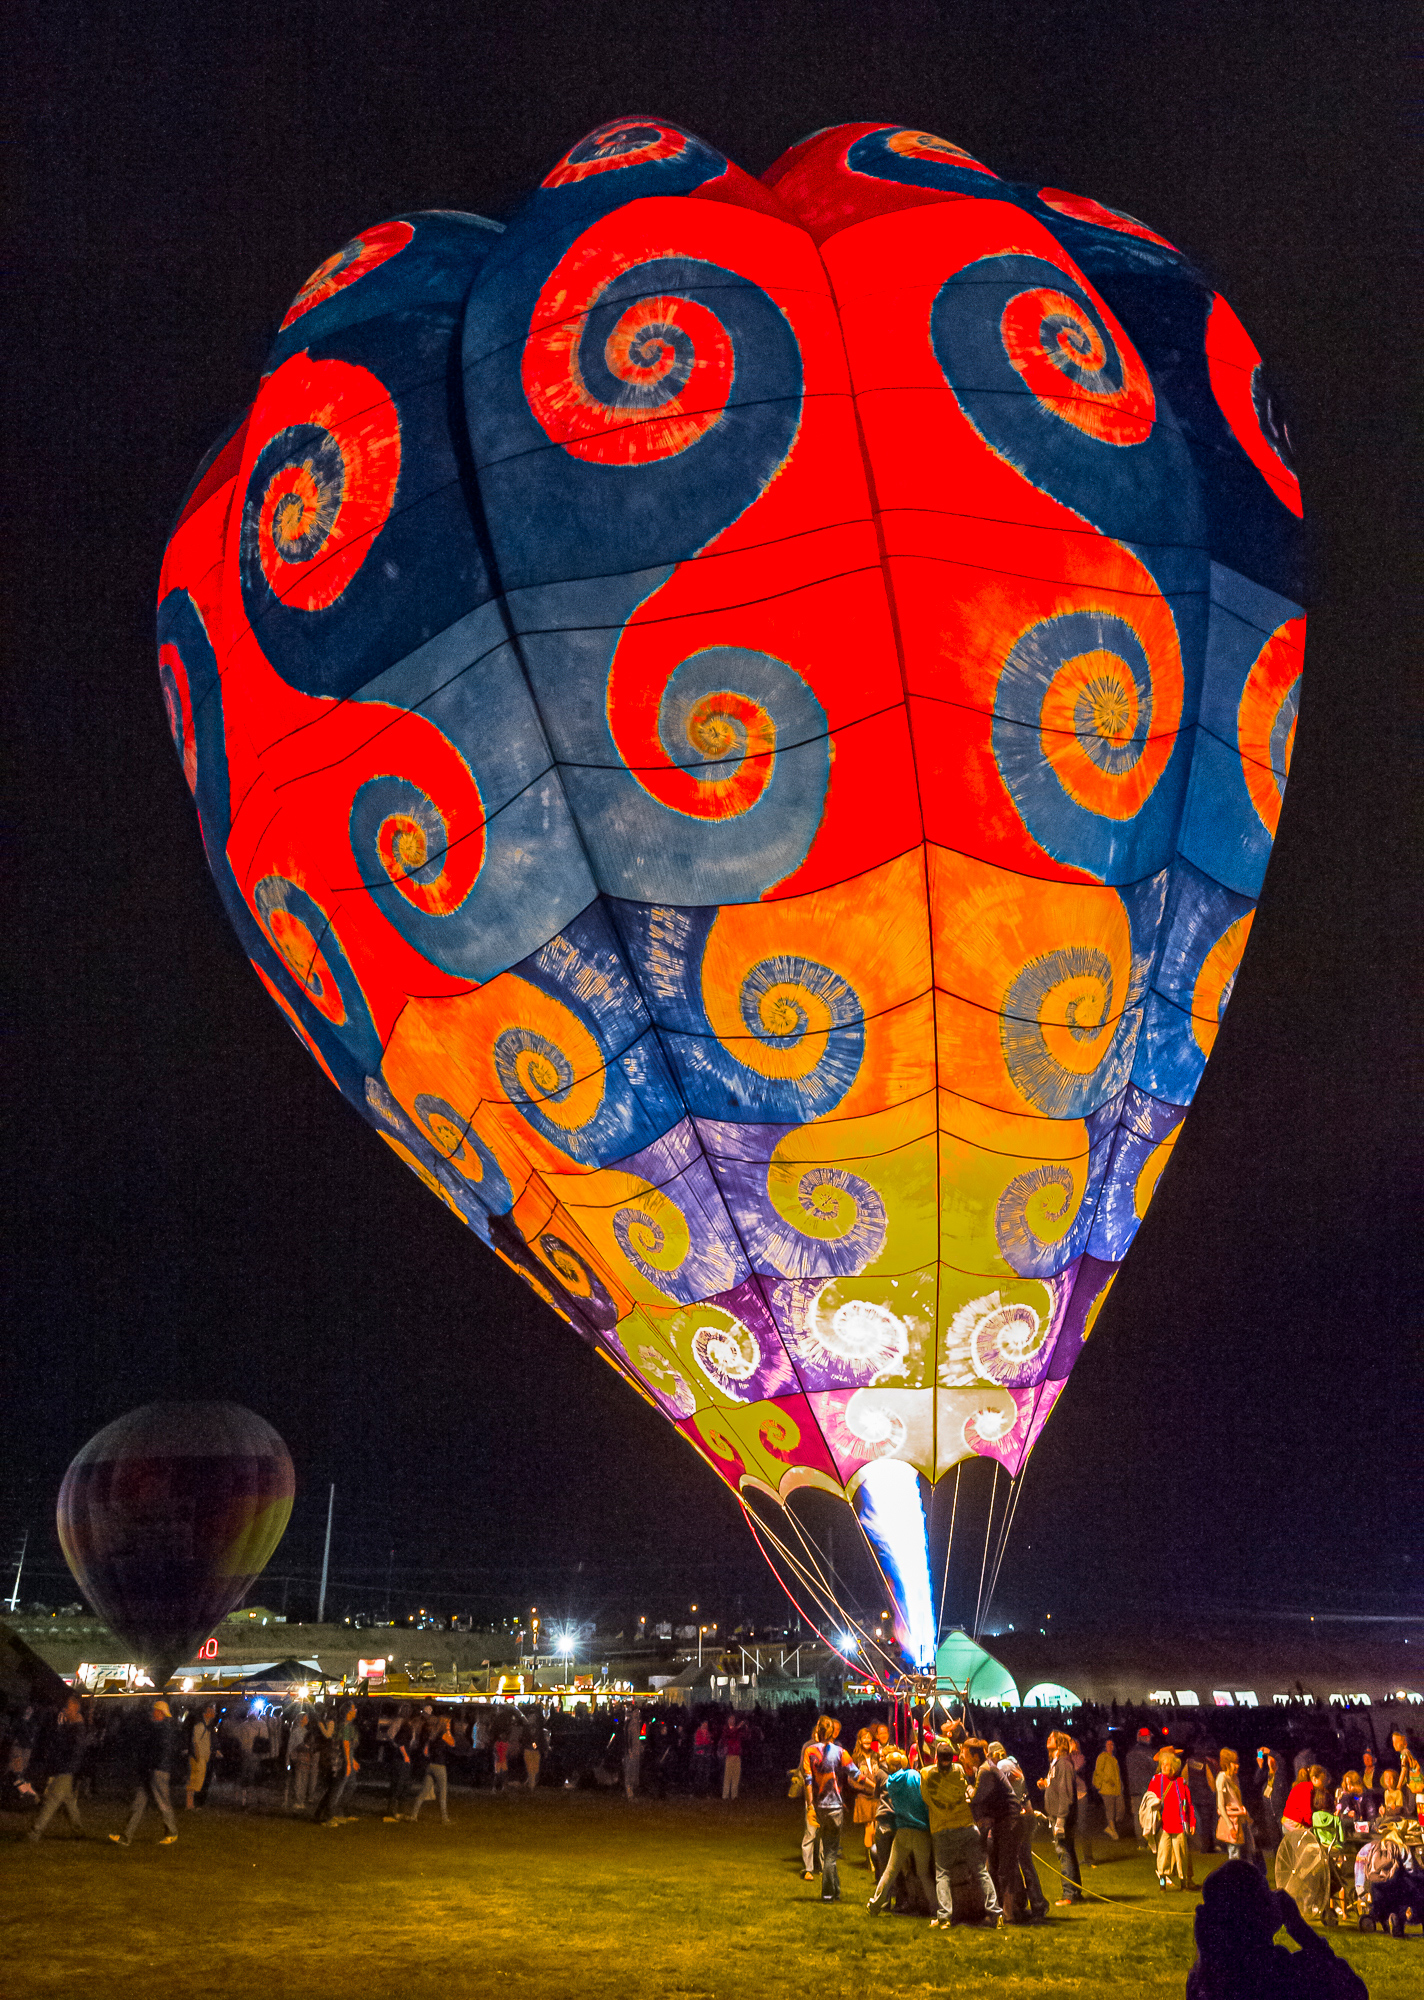 A brilliant hot air balloon fires up at night for public viewing